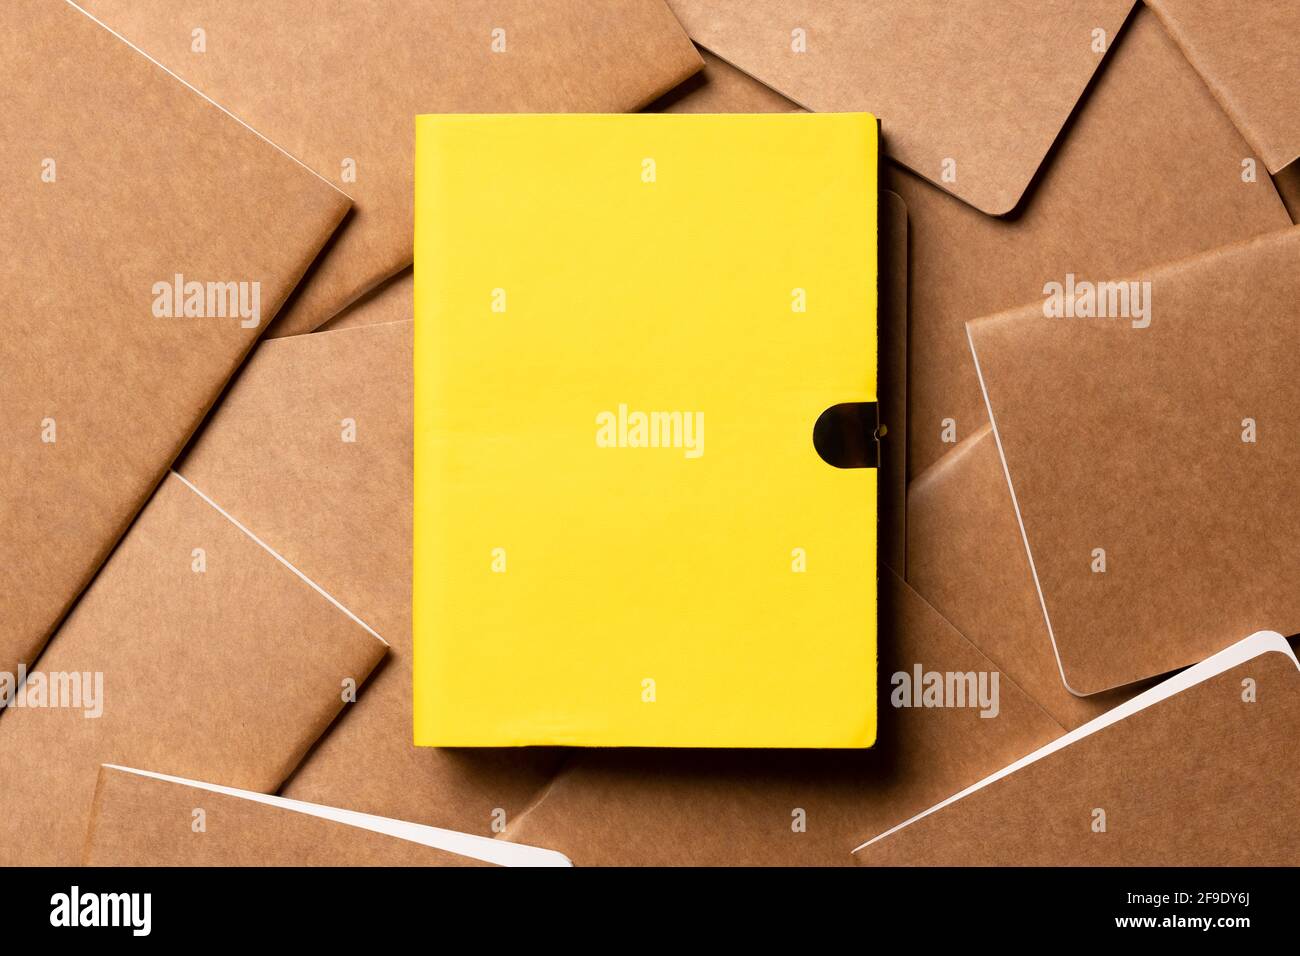 yellow notebook on brown kraft notebook disorder alignment on table background.mockup template for display content or design.content marketing concept Stock Photo